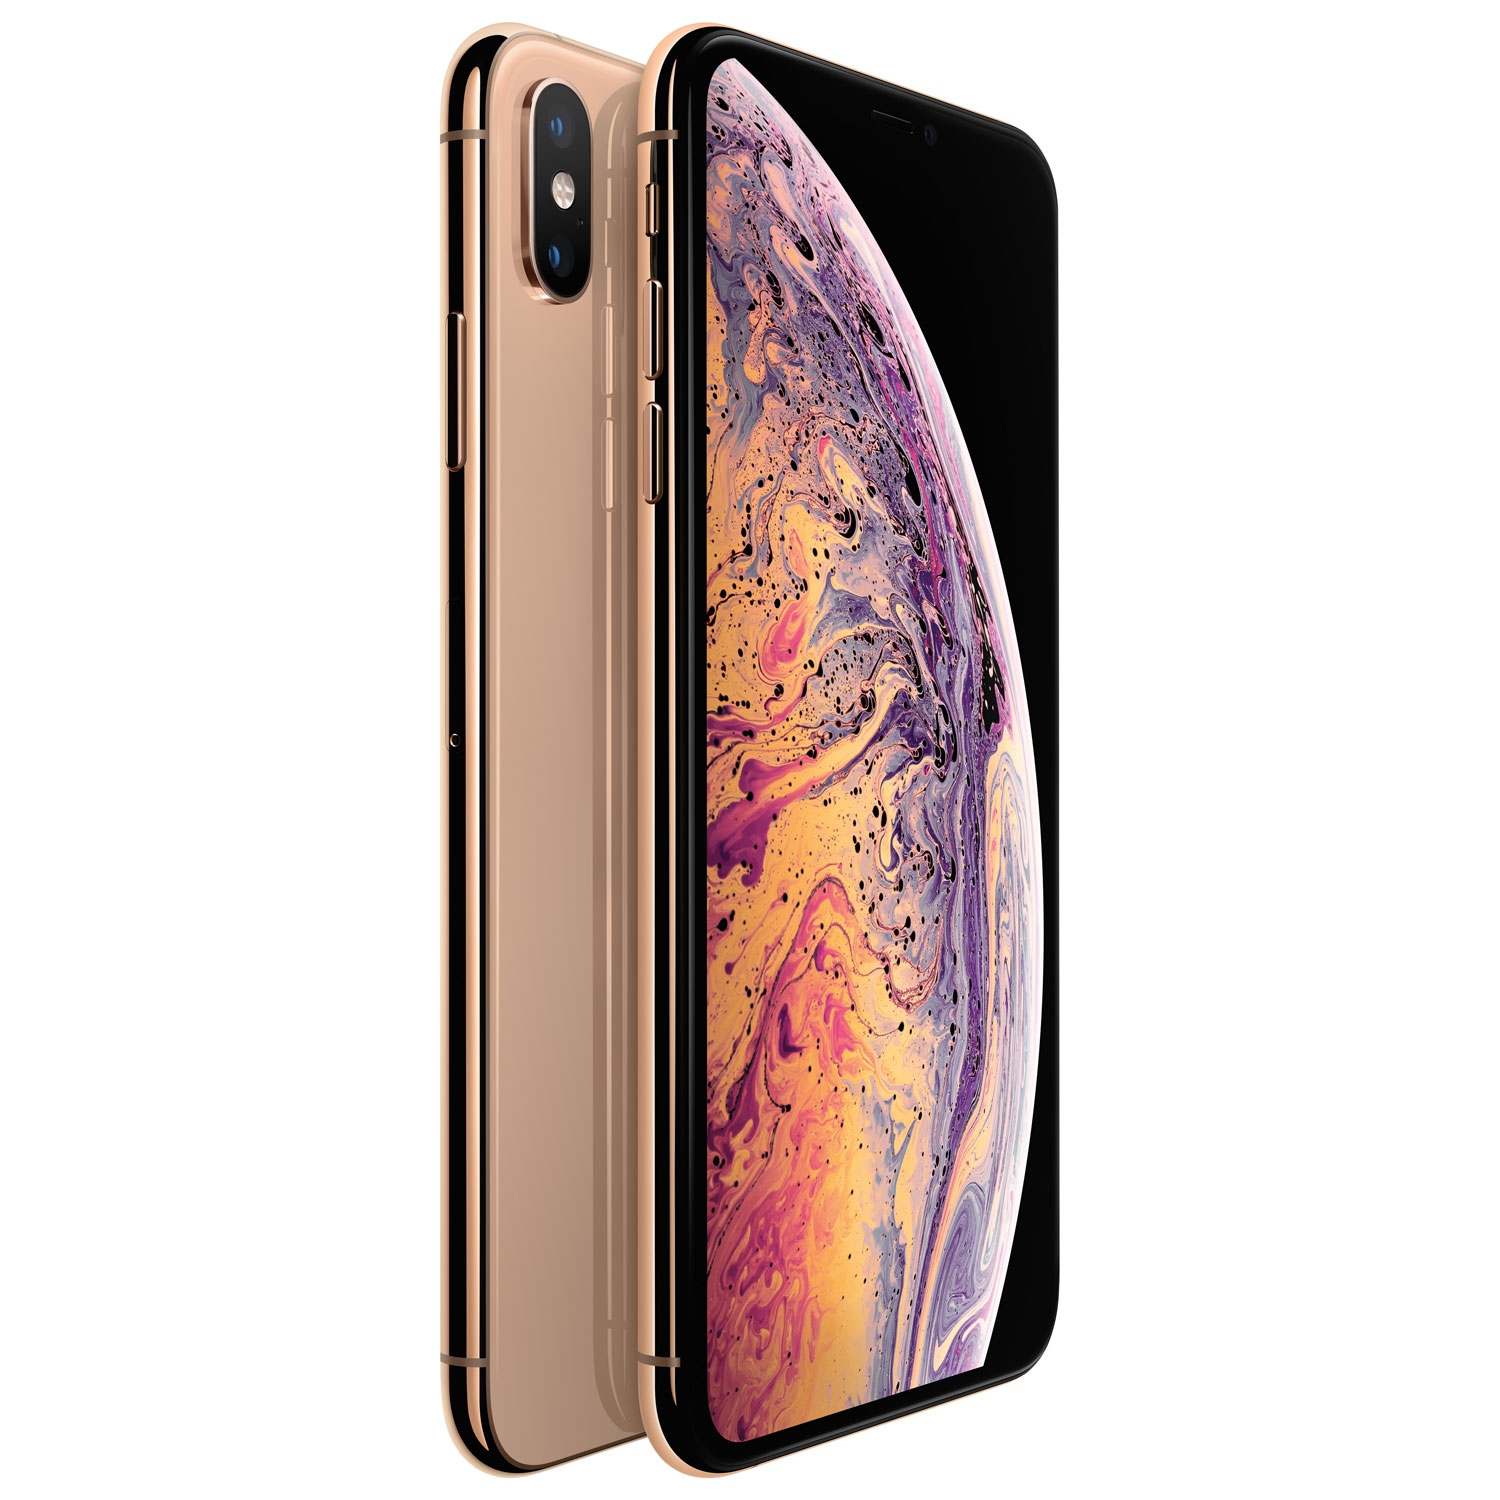 Refurbished (Excellent) - Apple iPhone XS Max 64GB Smartphone - Gold - Unlocked - Certified Refurbished